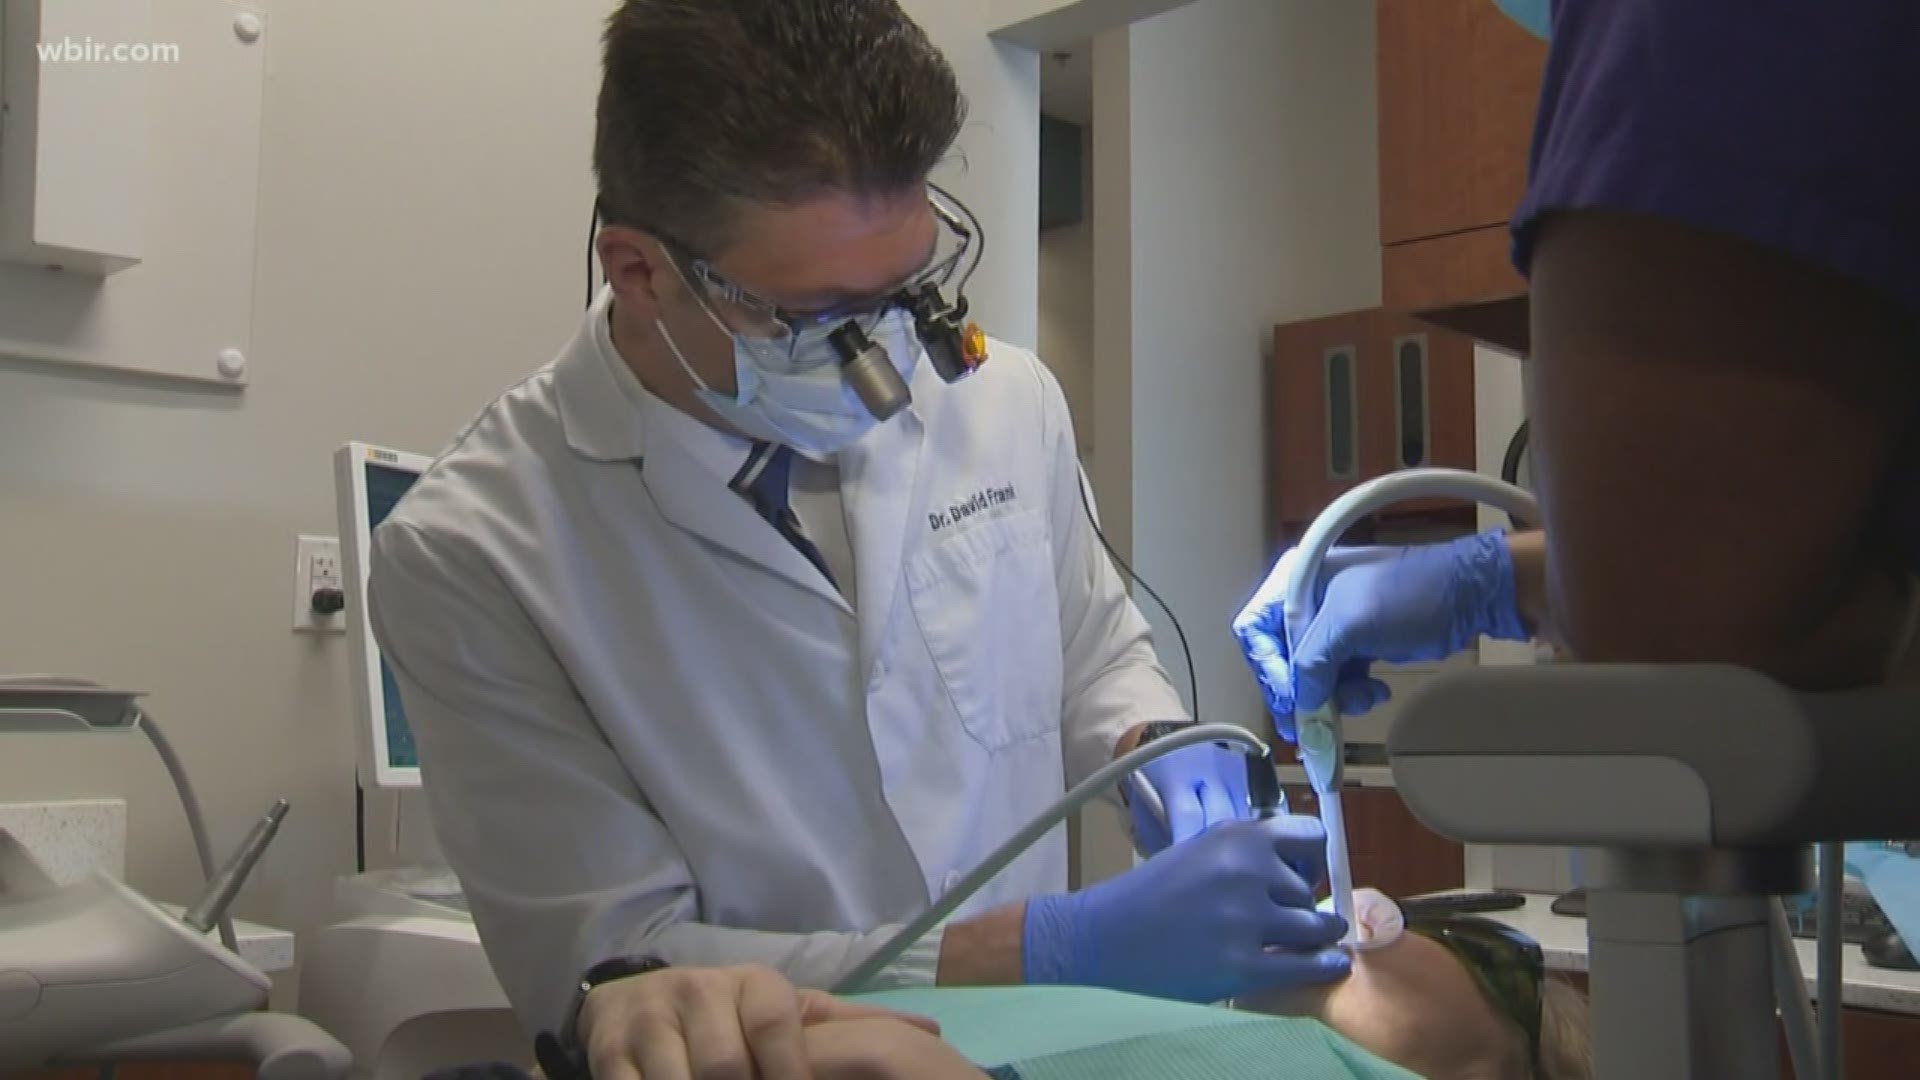 Gov. Lee and dentists push for more dental coverage for pregnant women